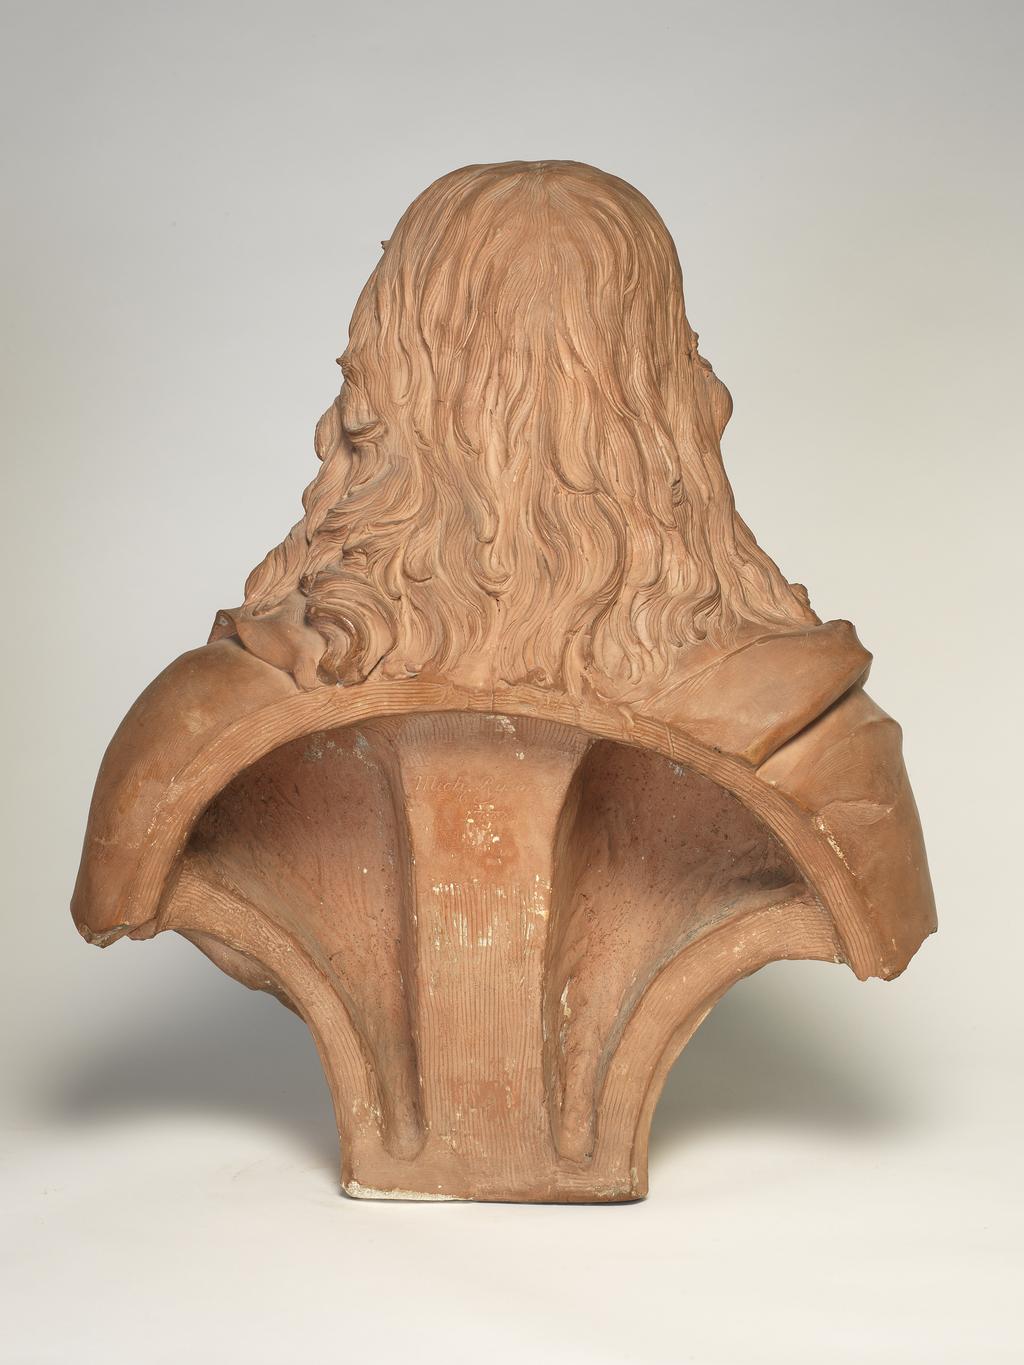 An image of Bust/Sculpture. John Milton (1608-1674). Rysbrack, John Michael (Briitsh, 1694-1770). The sitter is turned front, facing and looking slightly right. He is bare-headed, and his hair is falling long over the shoulders. He is clean-shaven. The sitter wears a doublet, with wide, falling-band collar, and drapery passing over the right shoulder, and under the left arm. The bust terminates in a low square base, inscribed on the front 'MILTON'. Terracotta, height 23 1/2 inches, dated 1738.